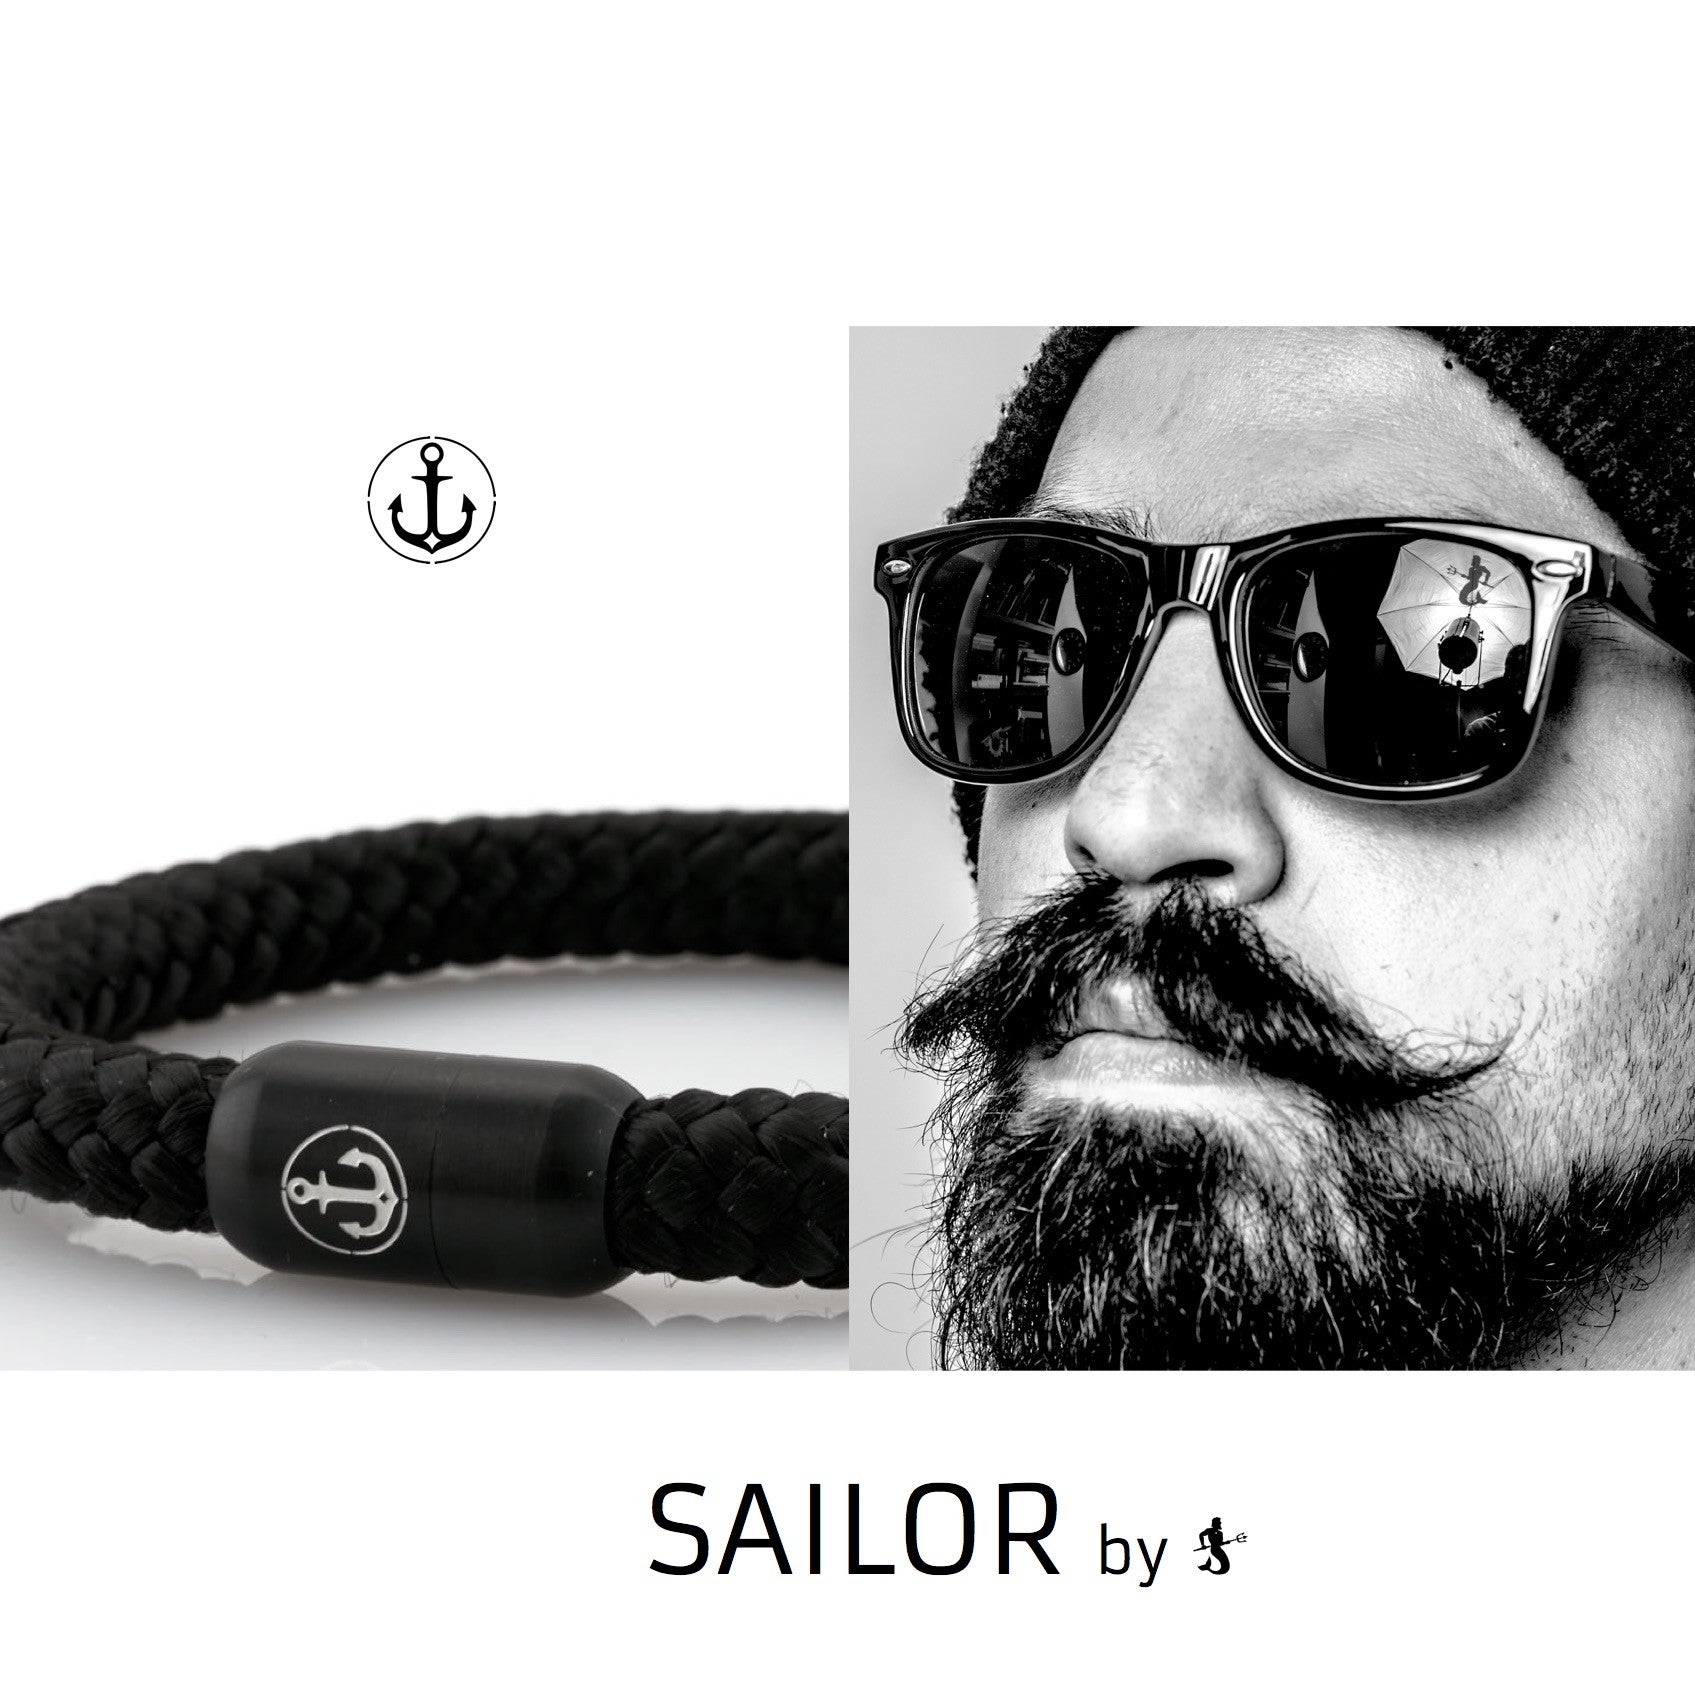 SAILOR Black Anchor is gone with the wind...